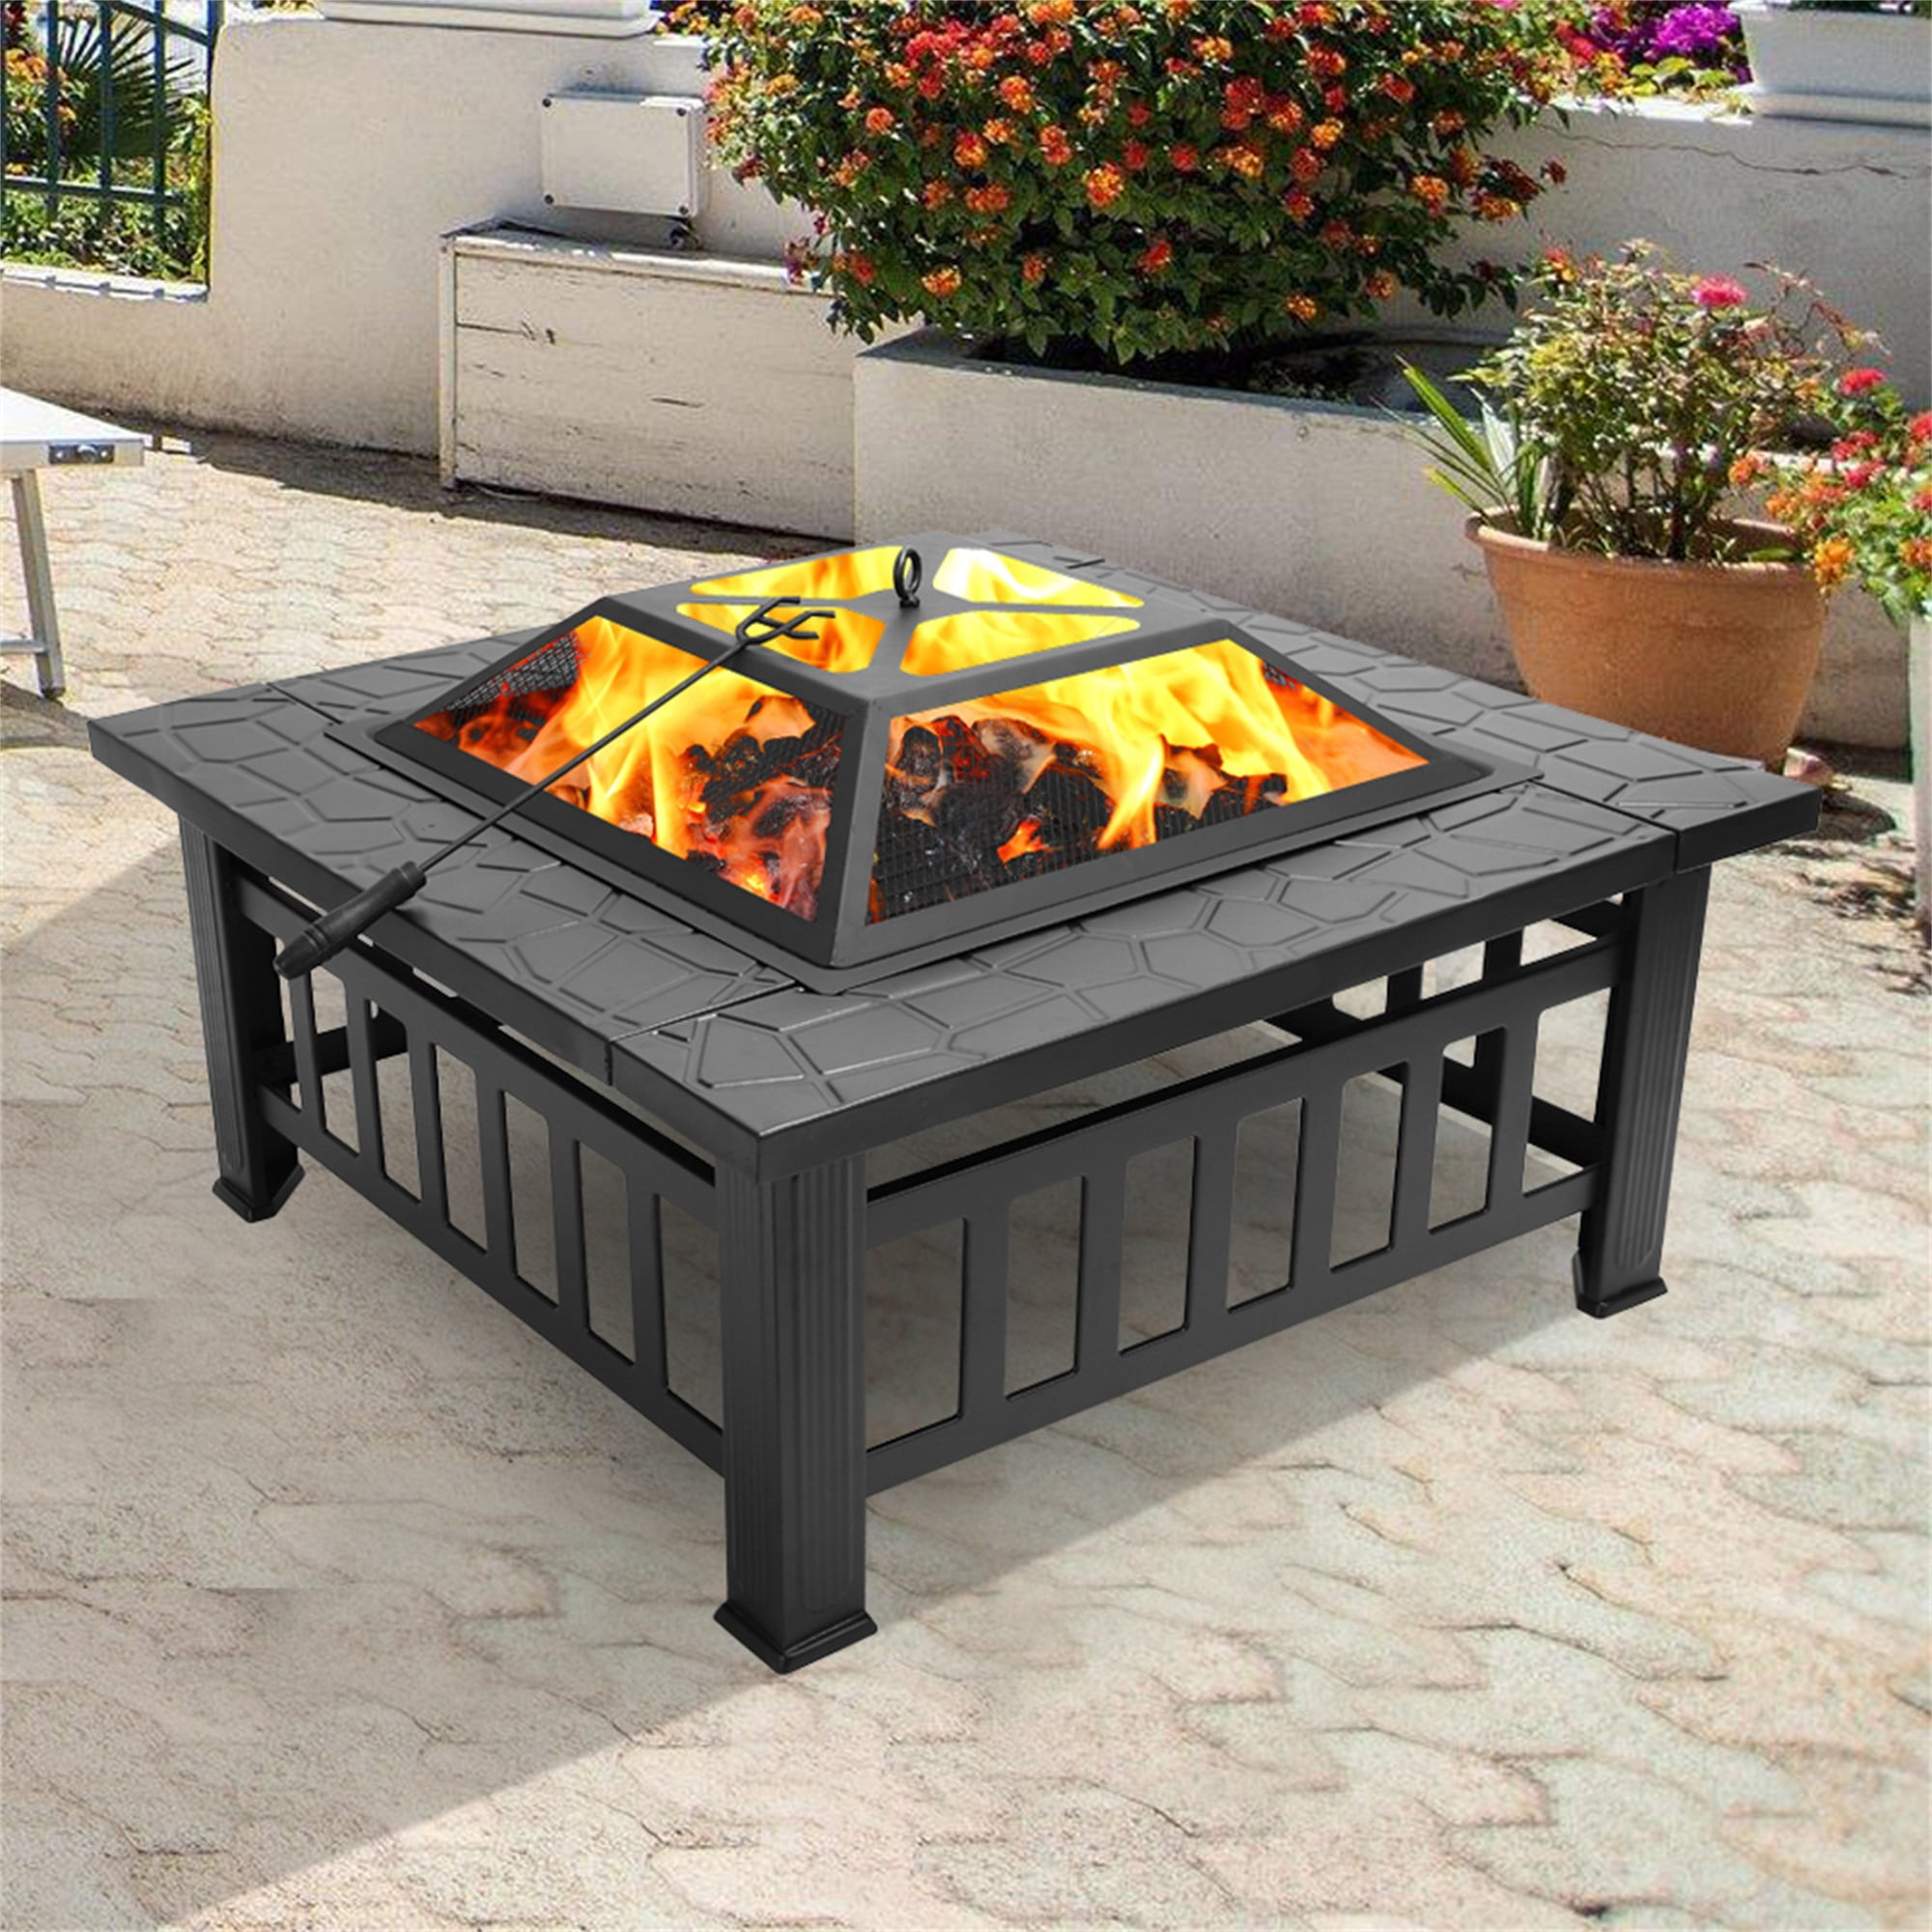 Outdoor Square Patio Fire Pit Home Garden Backyard Firepit Bowl ...
